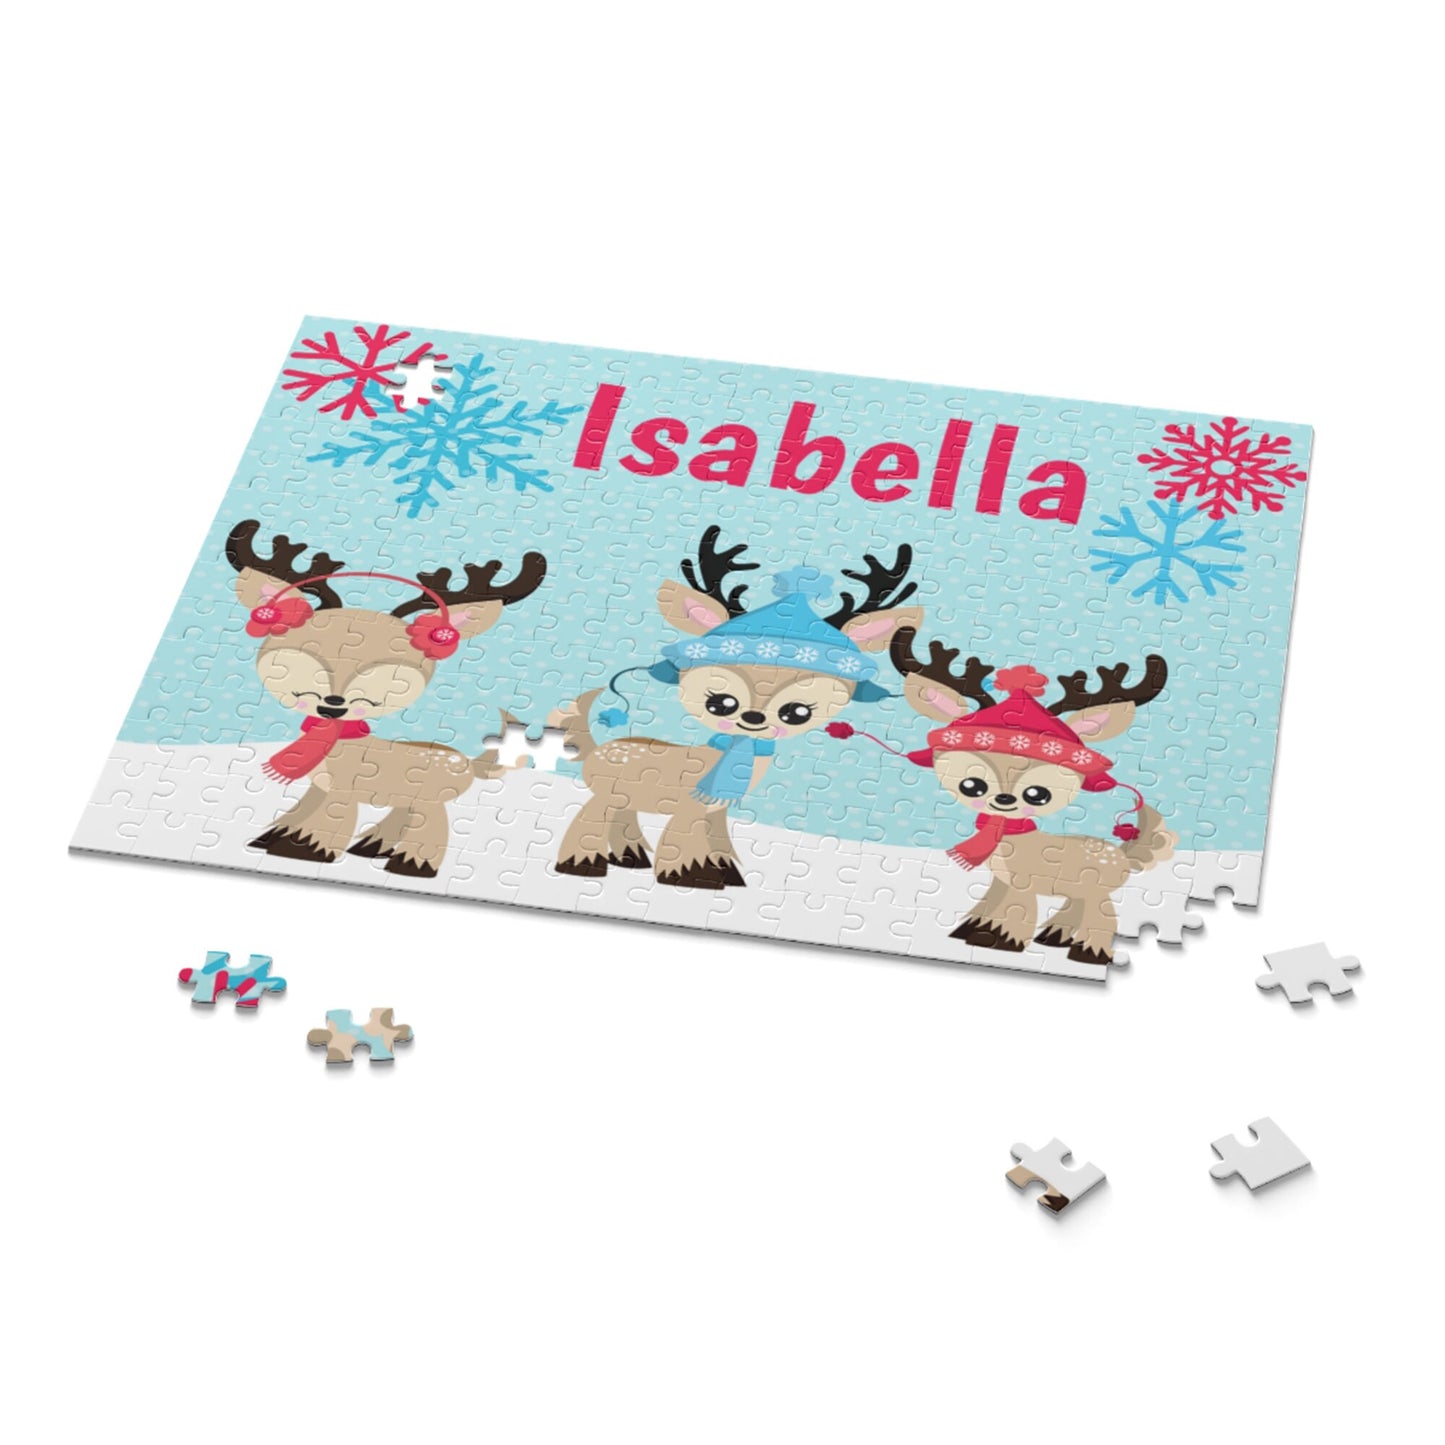 Personalized Gift for Kids, Personalized Christmas Puzzle, Reindeer Christmas Puzzle, Holiday Gift for Kids, Stocking Stuffers, Kid Gift